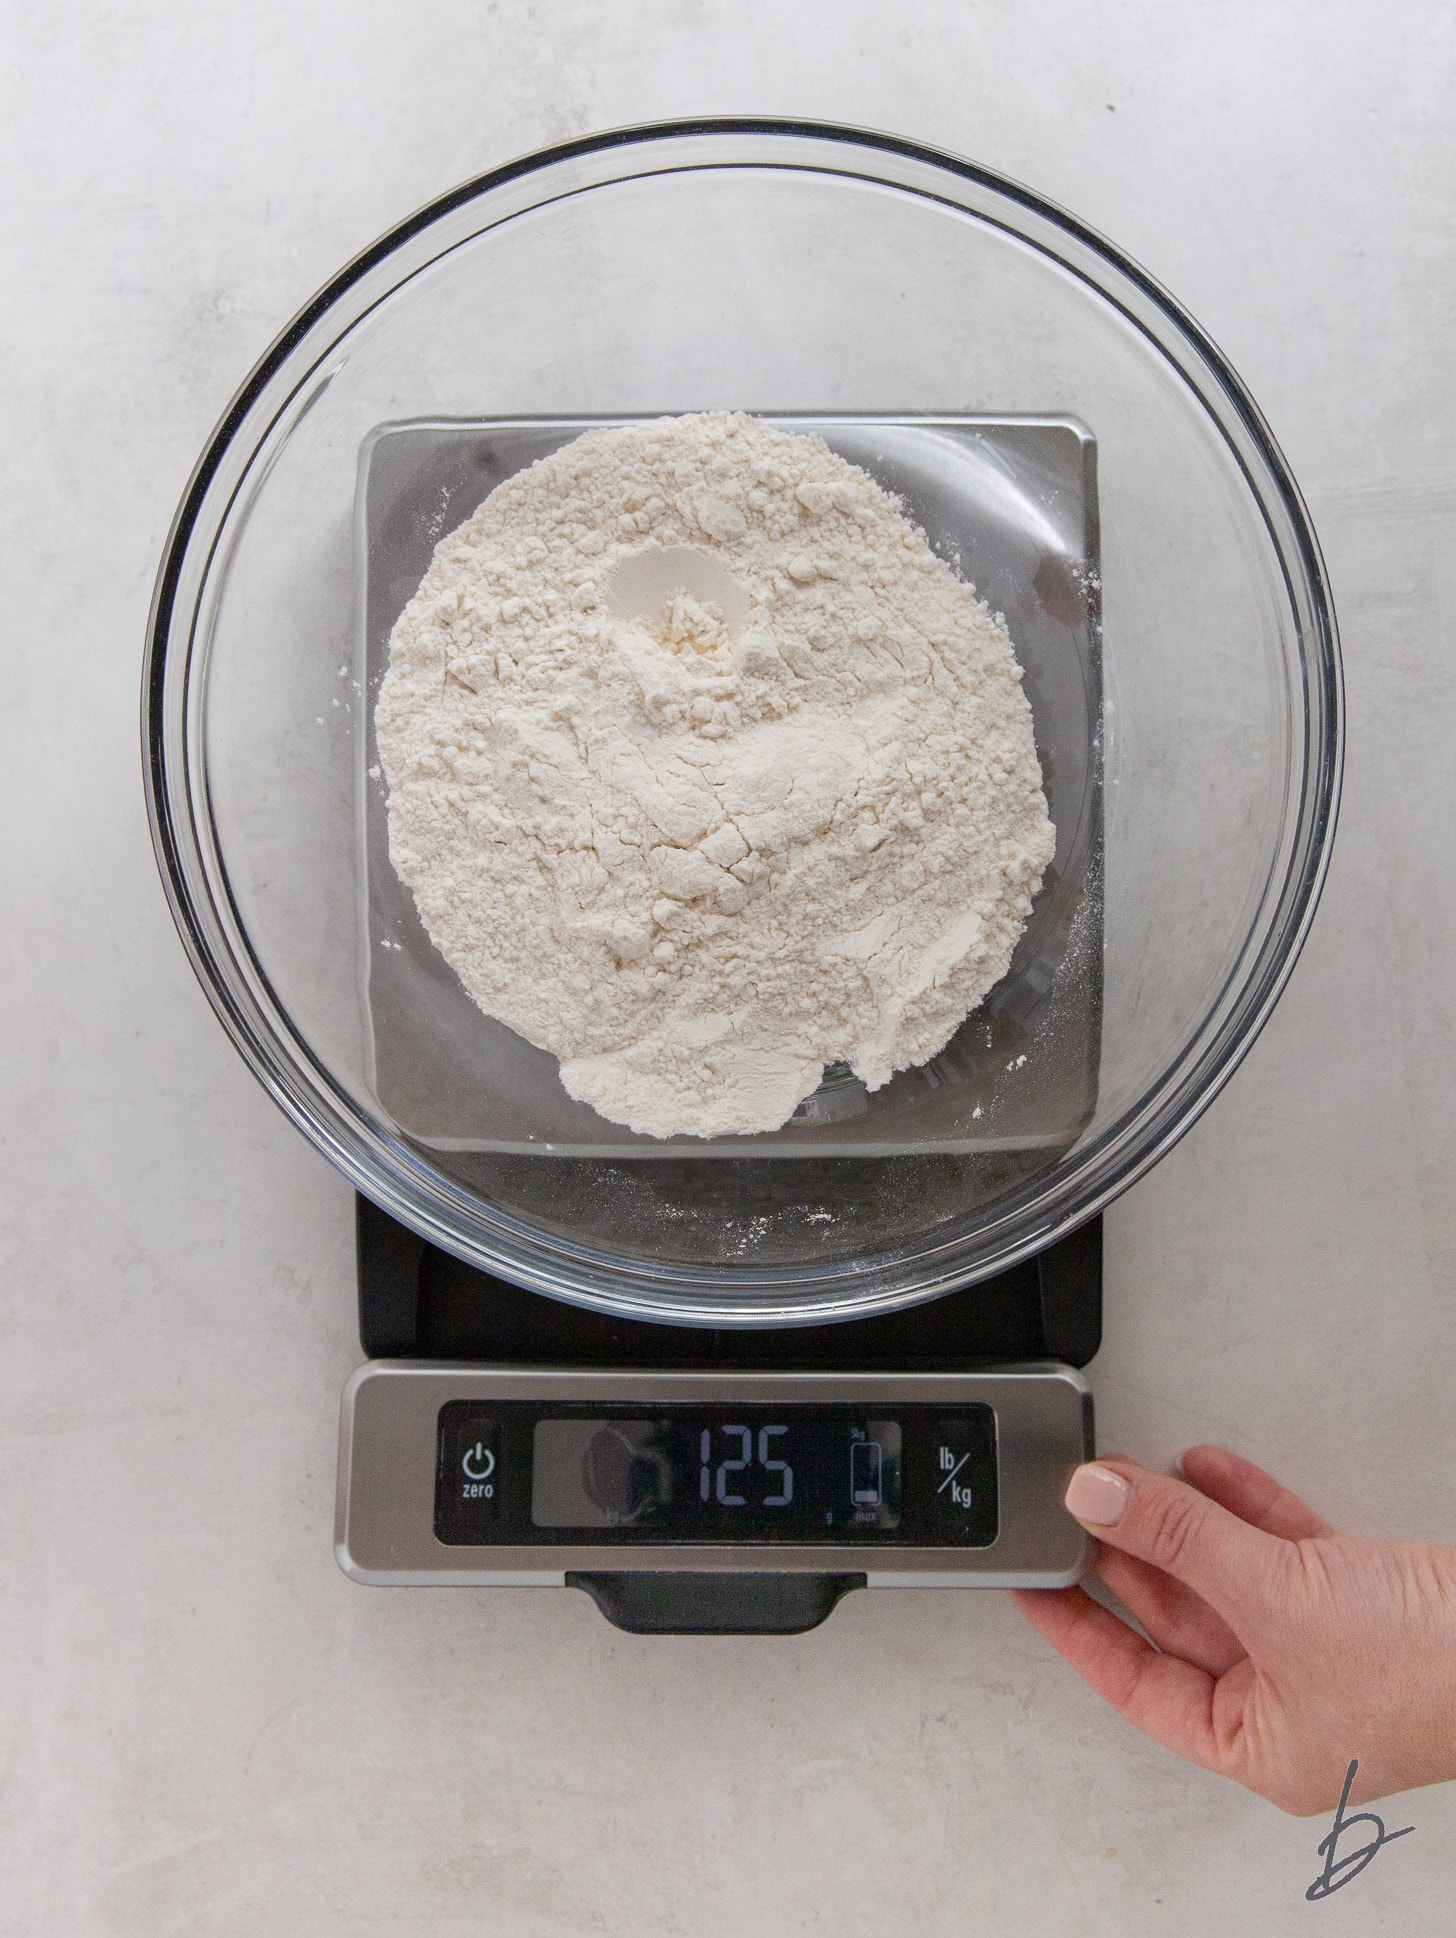 flour in a glass bowl on a kitchen scale reading 125 g.